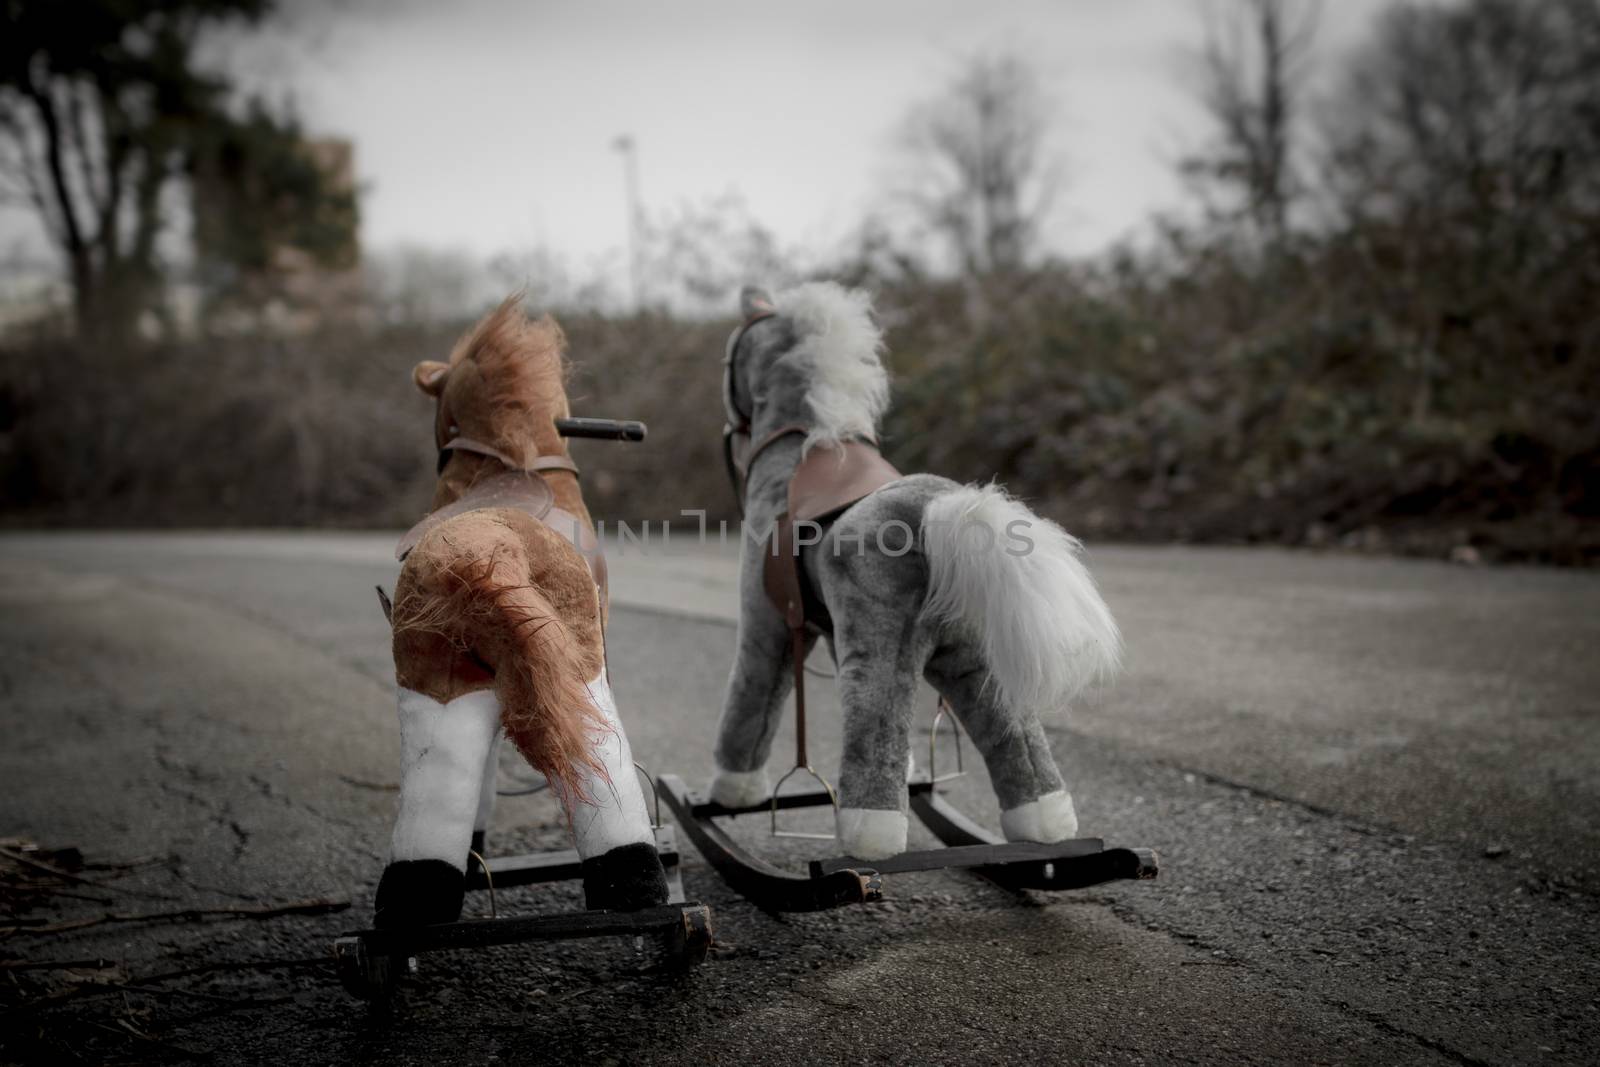 Two toy horses lie abandoned on the roadside.